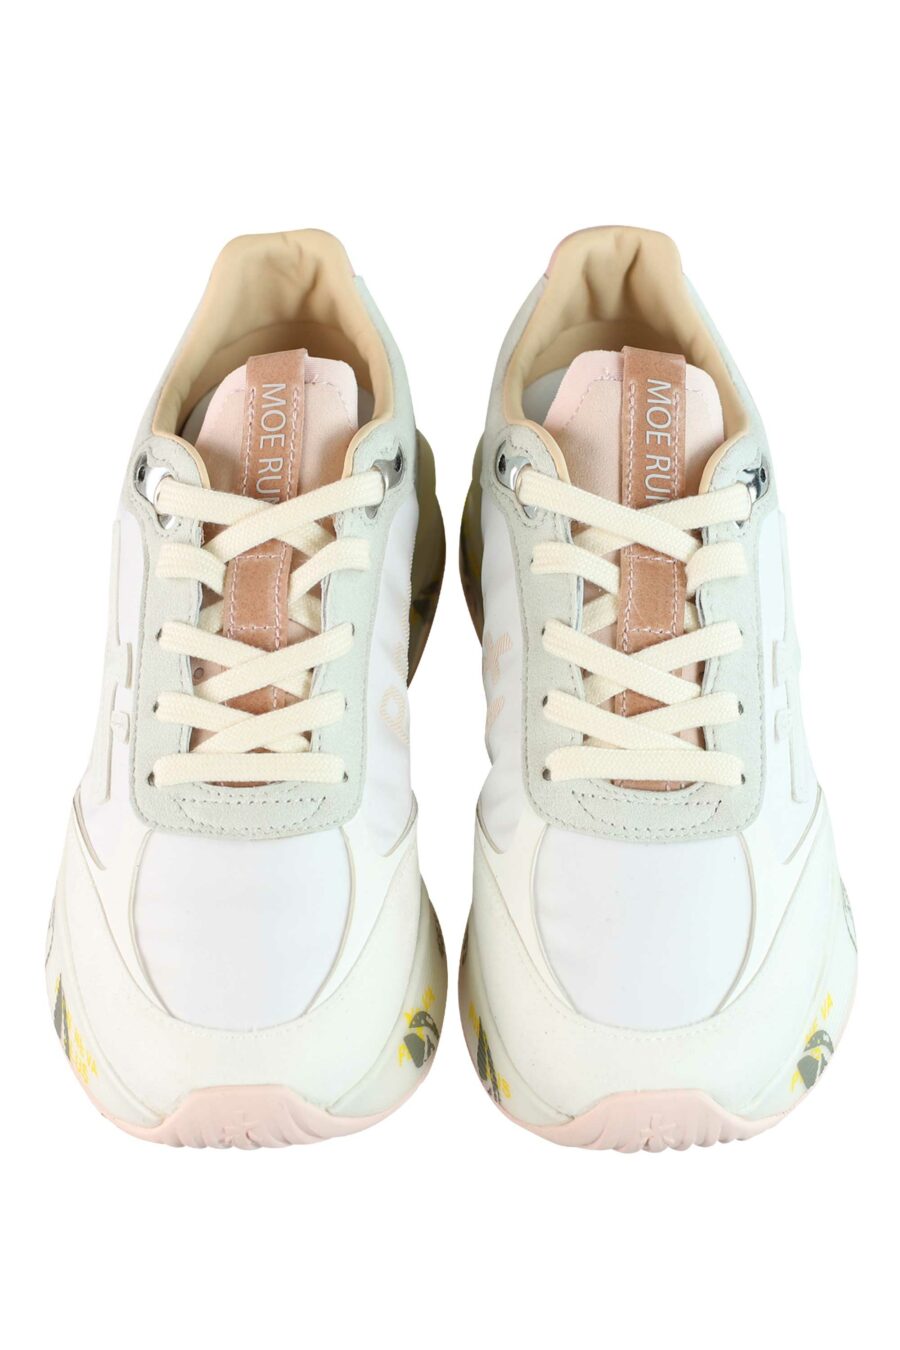 White trainers with pink and grey "moe run-d 6338" - 8058326253473 5